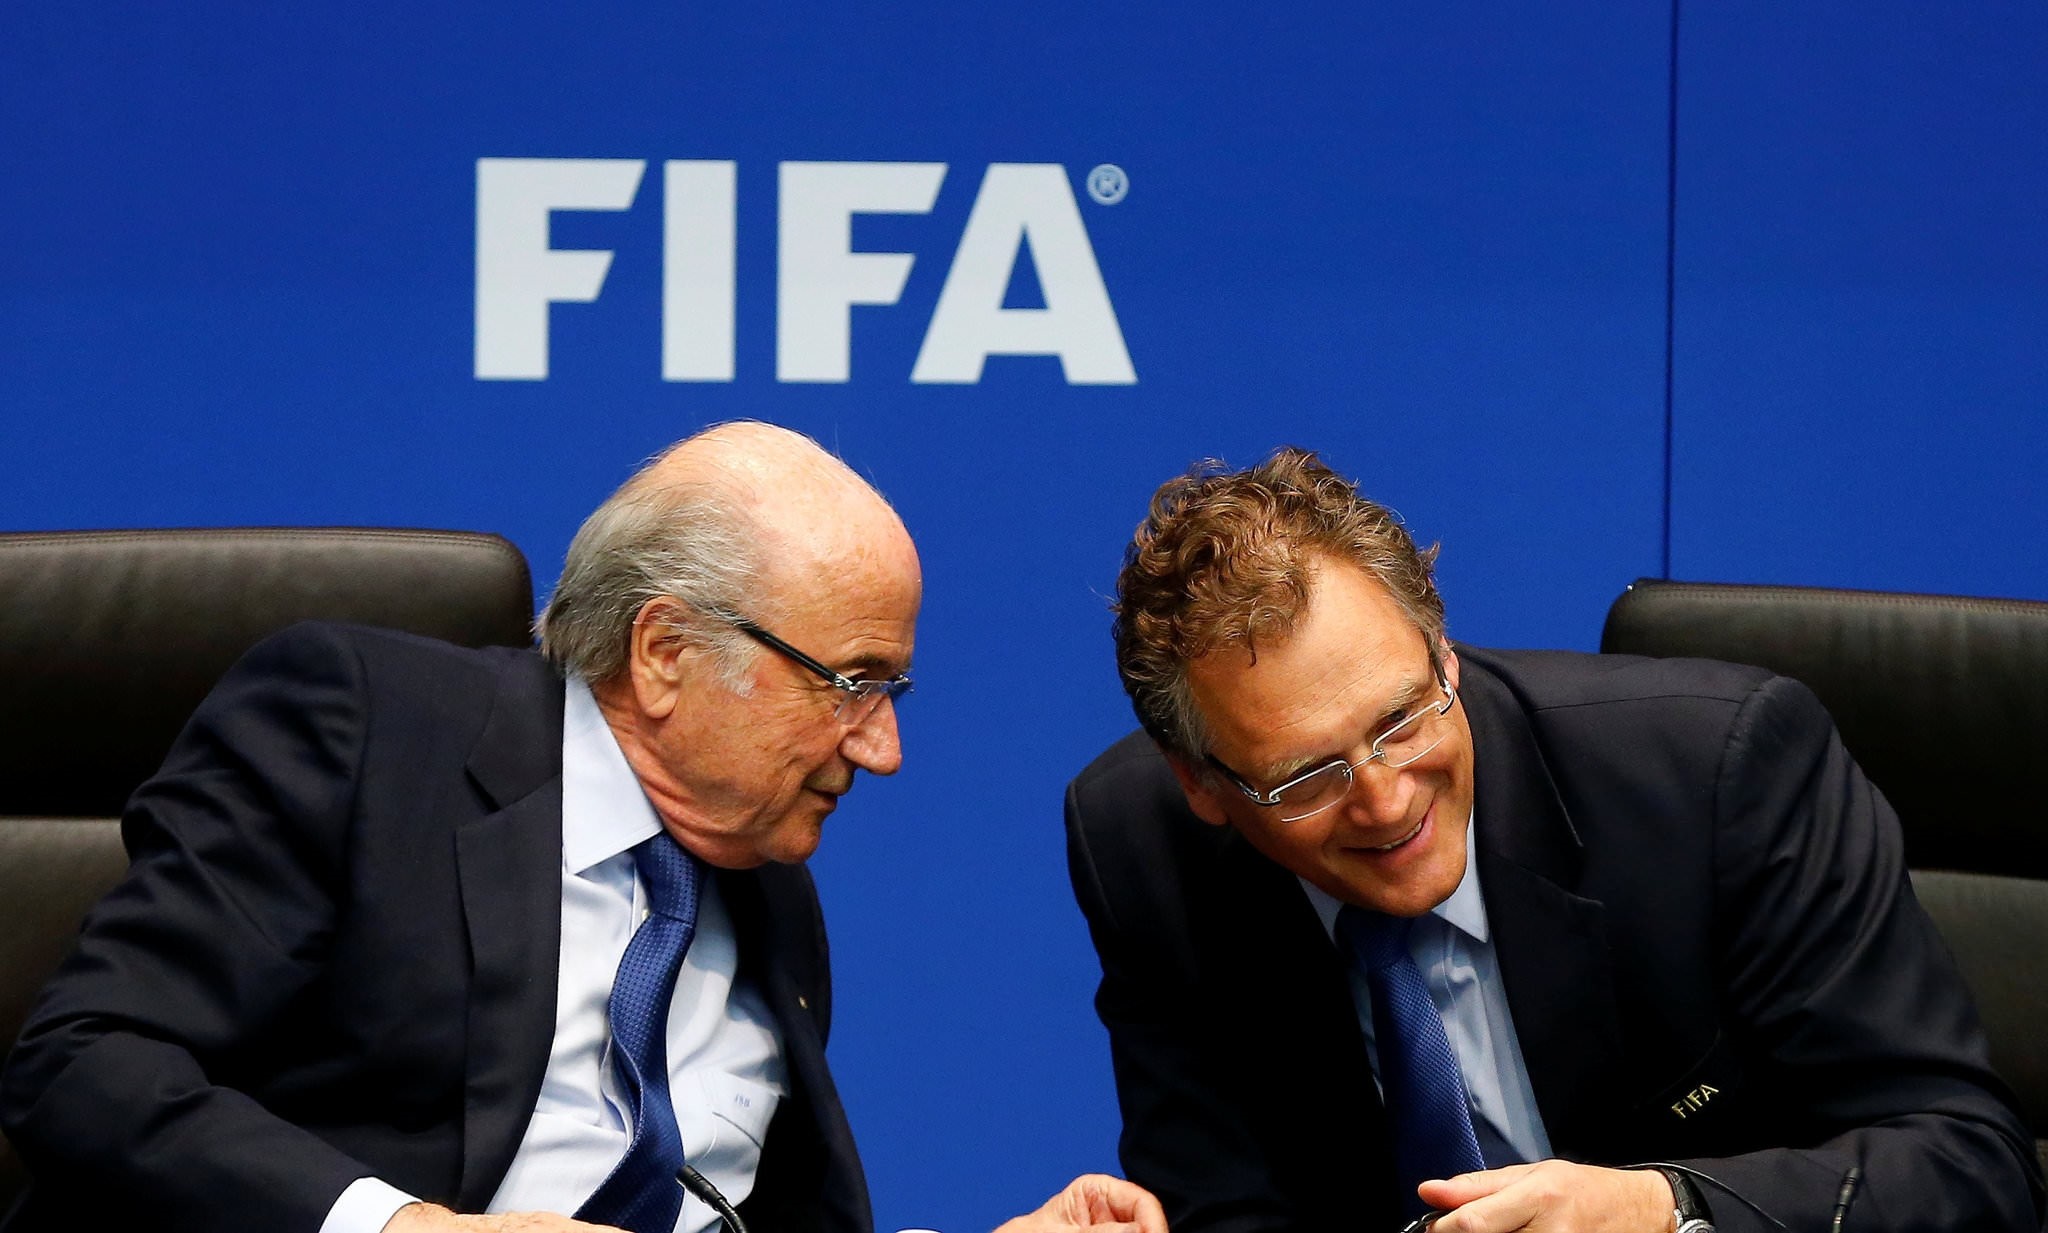 FIFA President Sepp Blatter (L) talks to FIFA Secretary General Jerome Valcke during a news conference after a meeting of the FIFA executive committee in Zurich March 21, 2014. (REUTERS Photo)